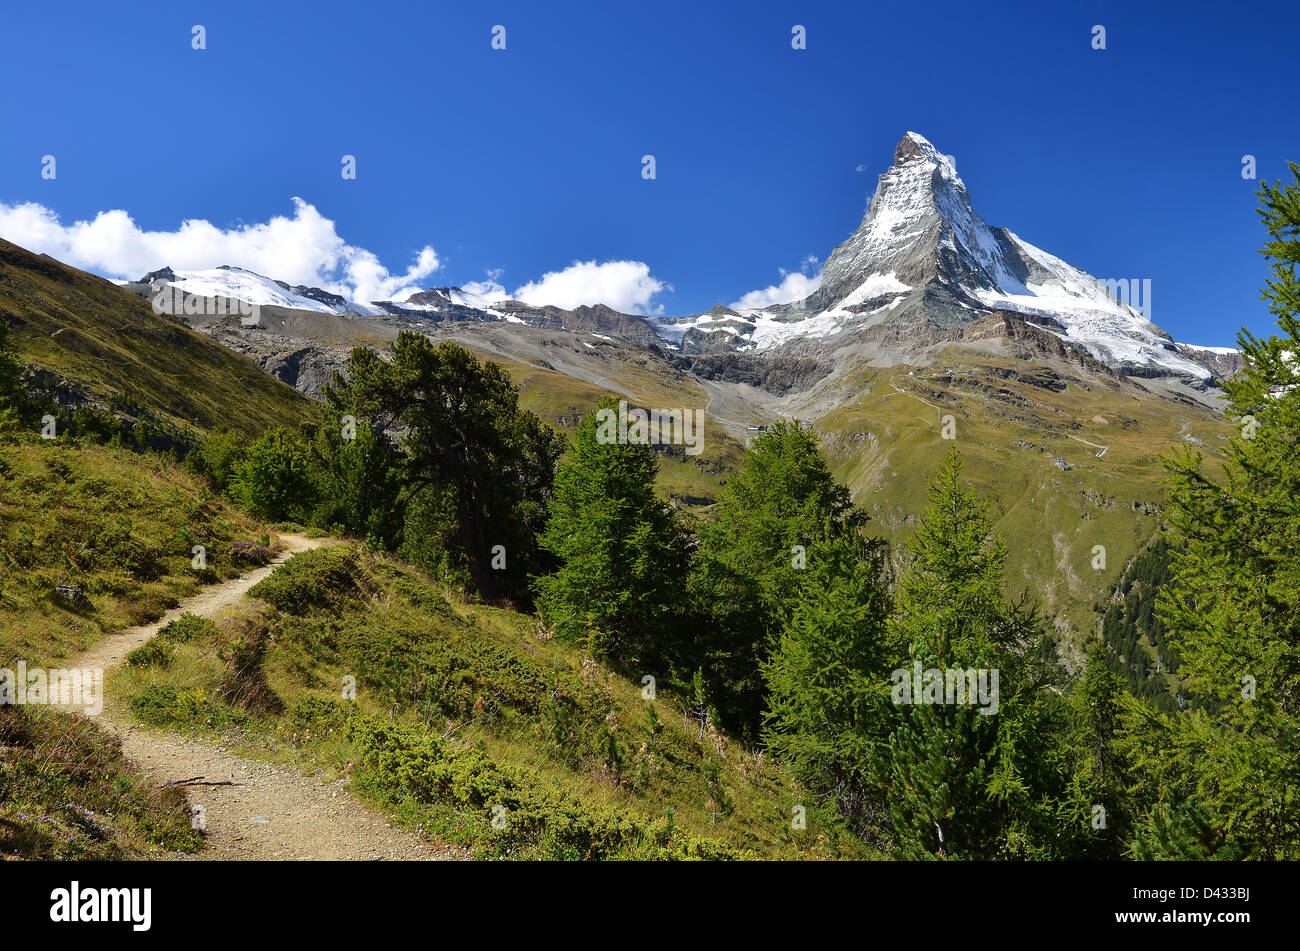 Matterhorn (Monte Cervino), Switzerland. One of the highest mountains from Alps and Europe (4484 m altitude) Stock Photo